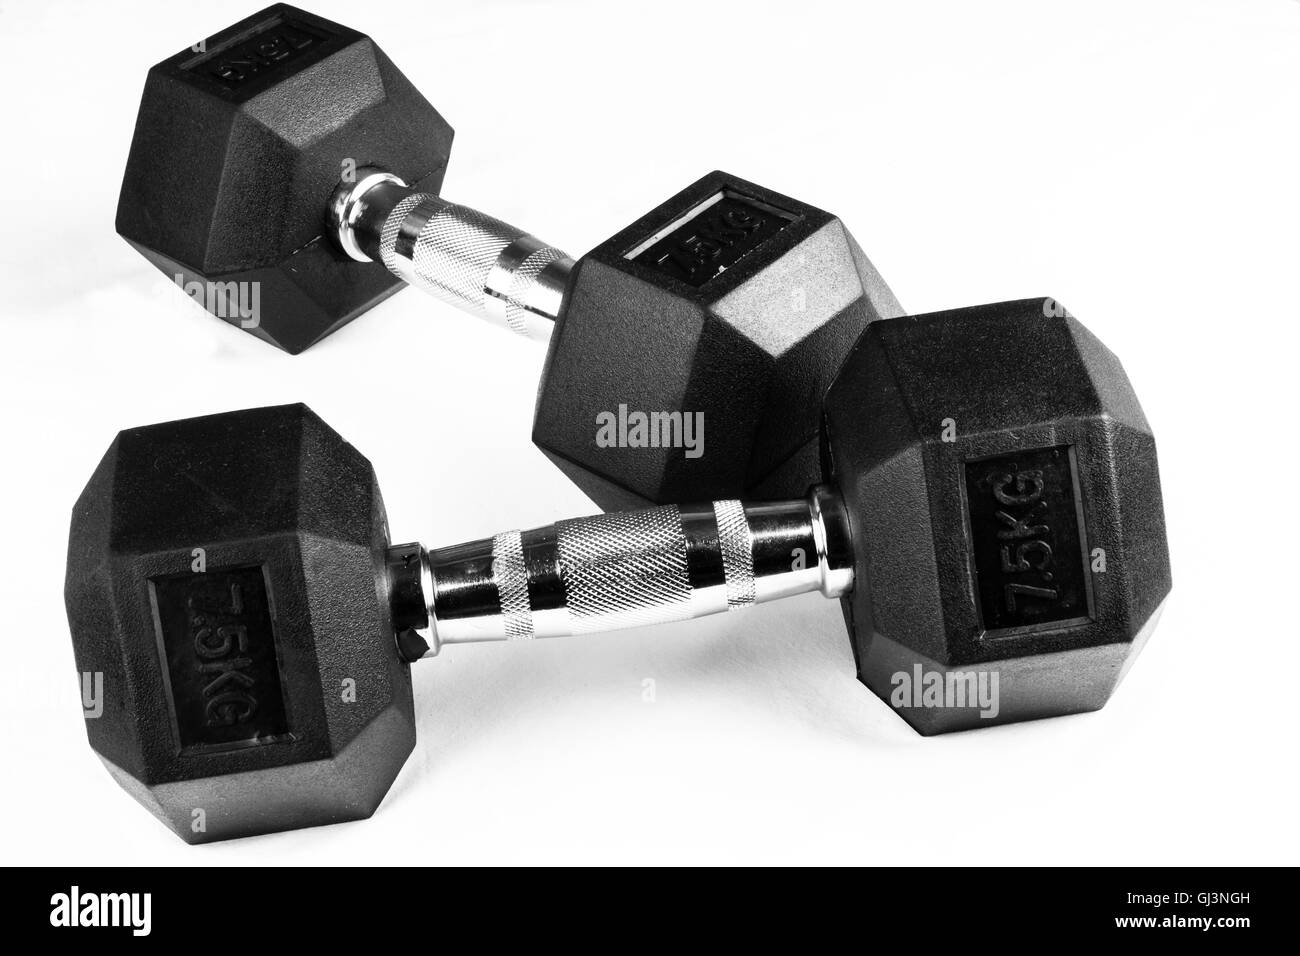 Two 7.5kg dumb-bells black with chrome handles on white background Stock Photo